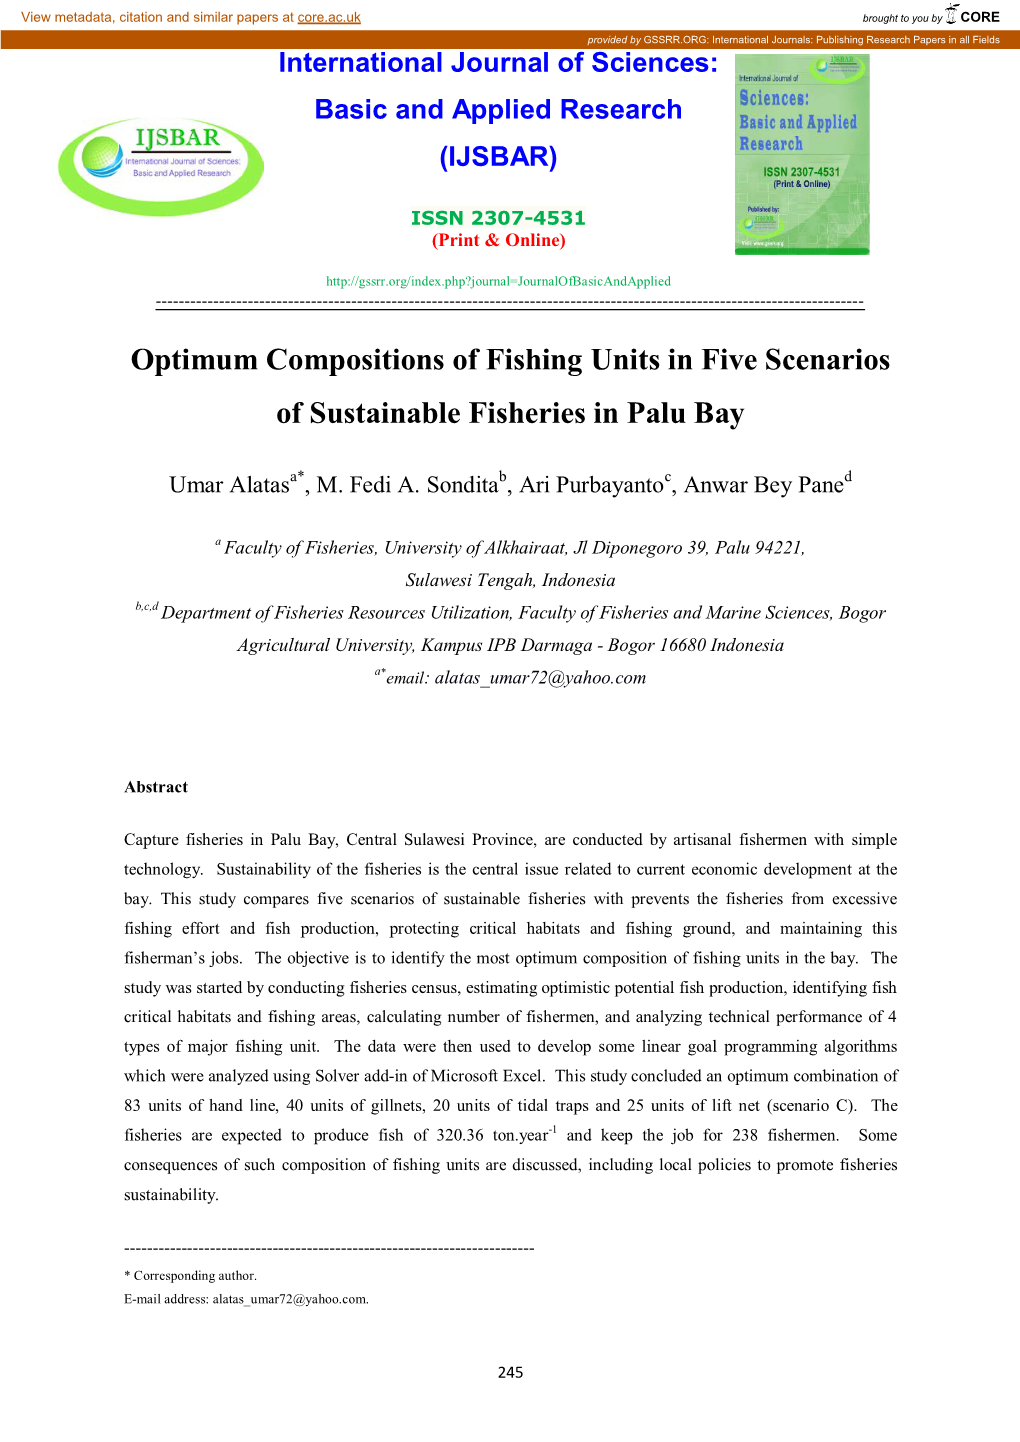 Optimum Compositions of Fishing Units in Five Scenarios of Sustainable Fisheries in Palu Bay